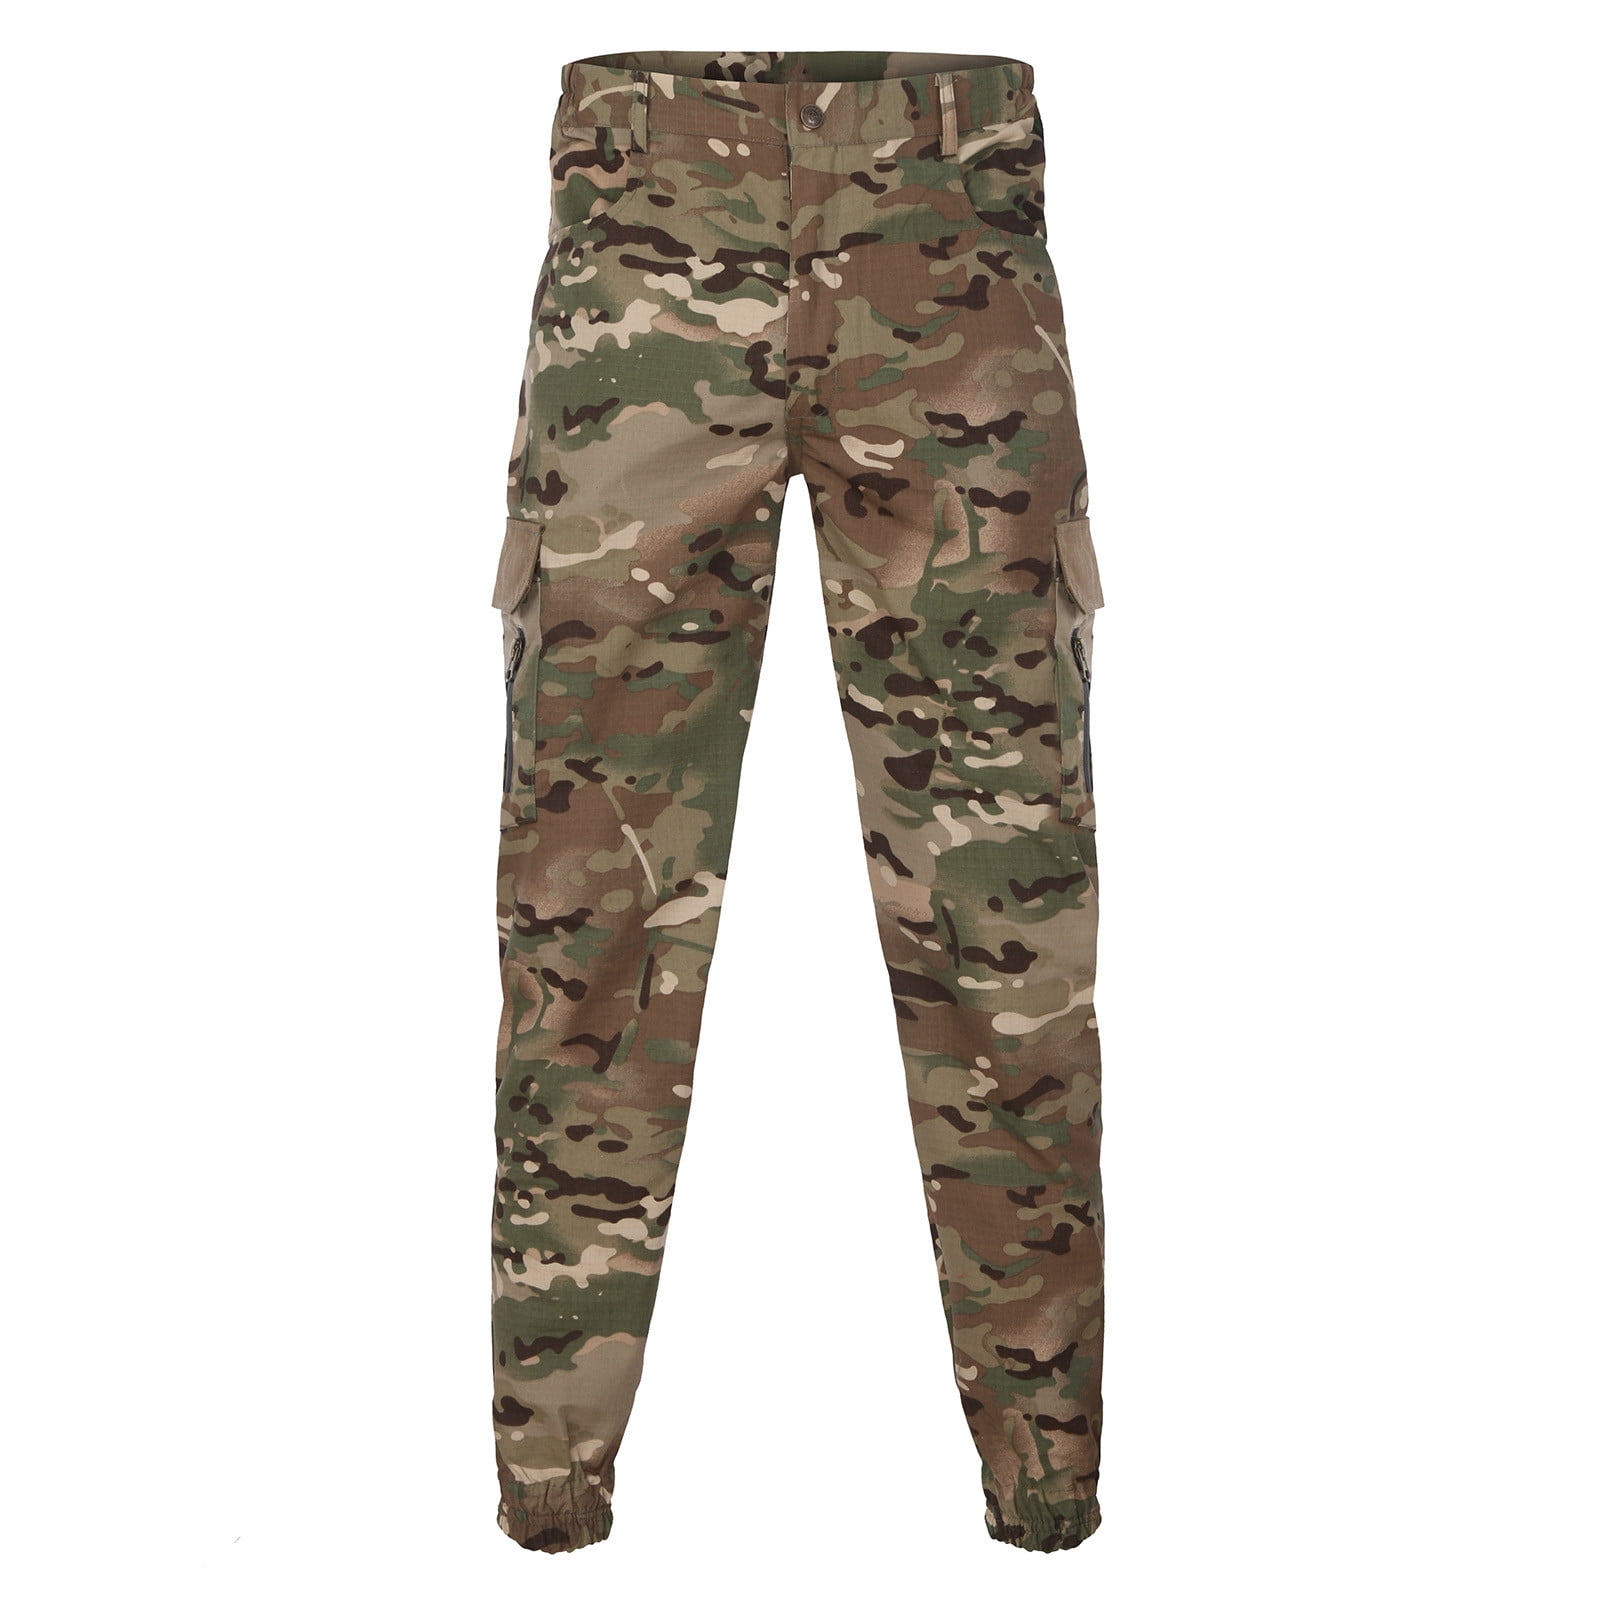 safuny Cargo Pants for Men Comfy Lounge Casual Elastic Waist Camouflage ...